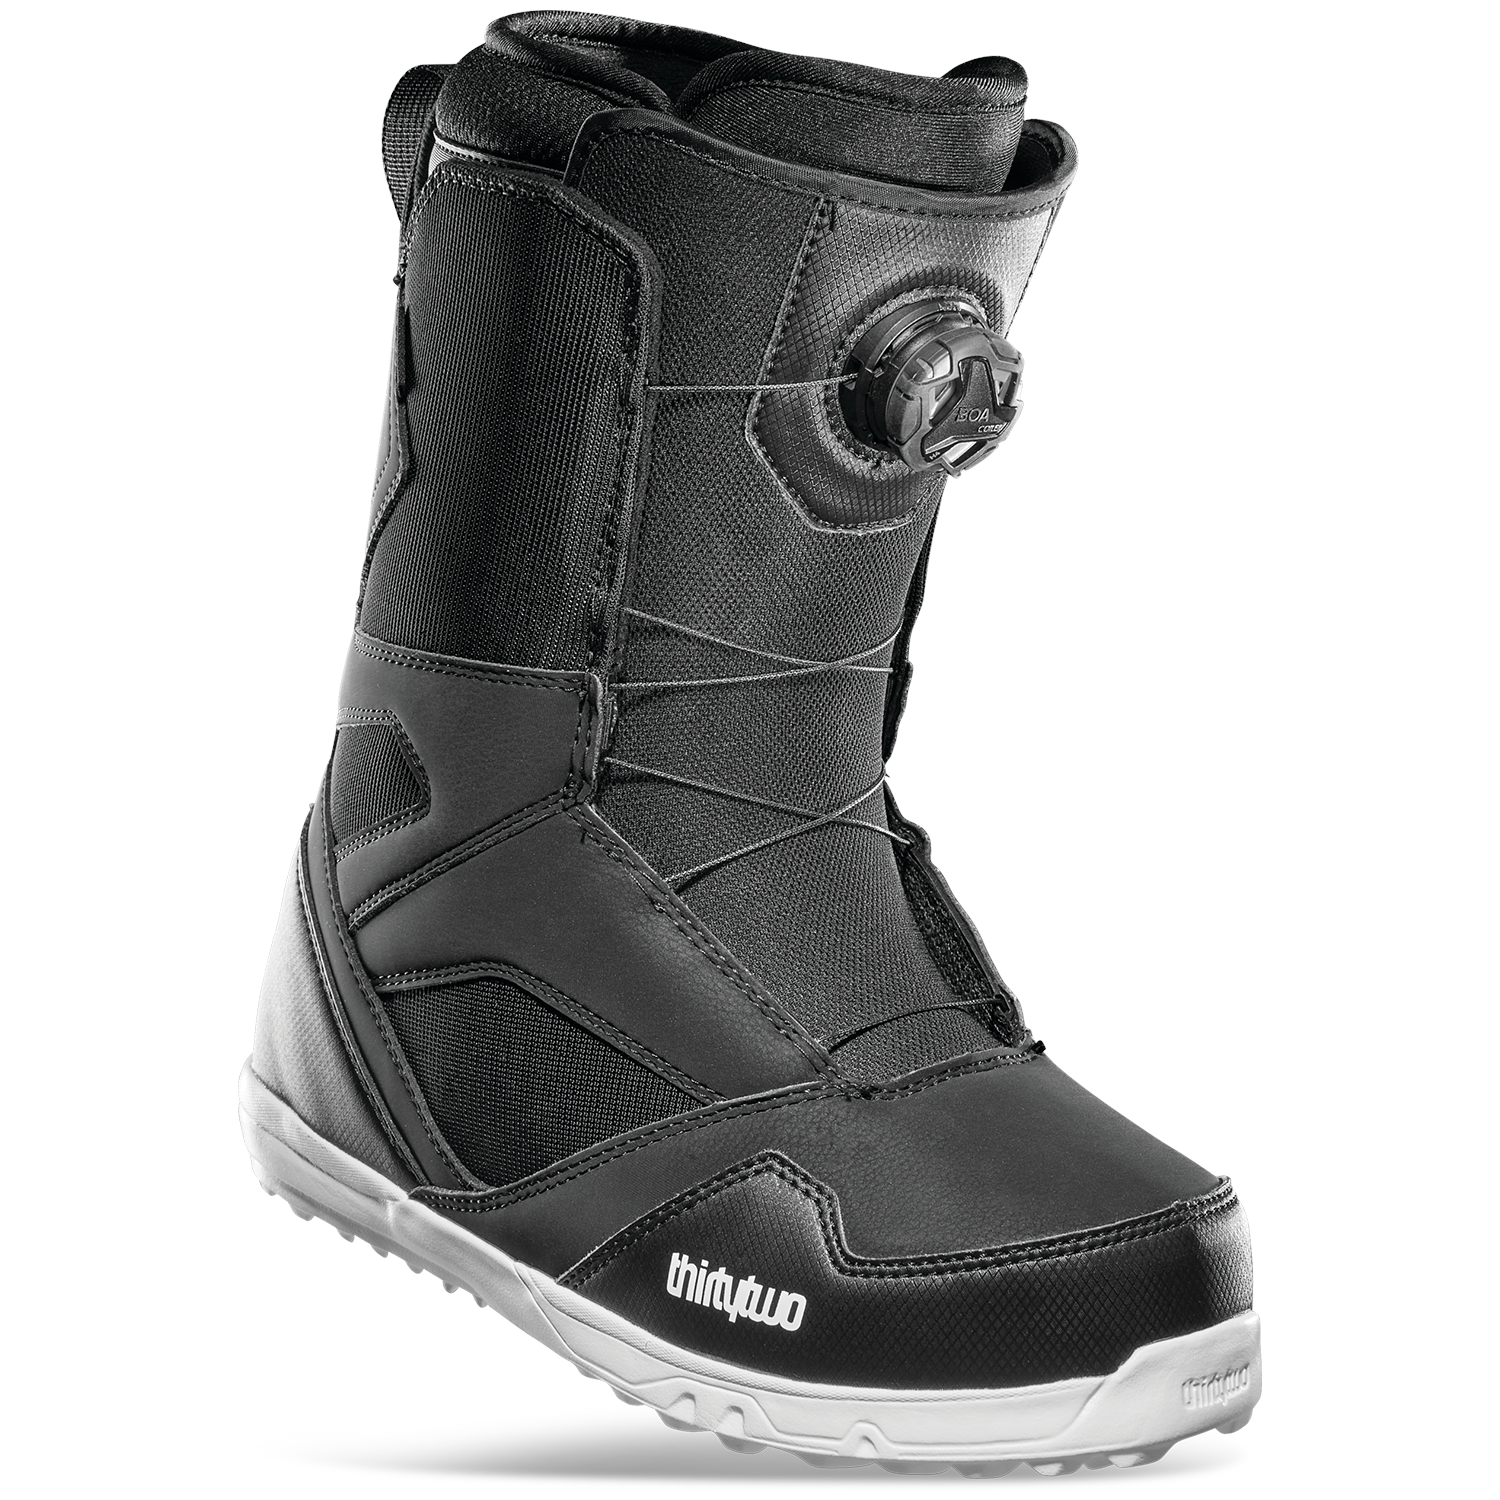 ThirtyTwo 32 STW BOA 18 Snowboard Boots Mens 